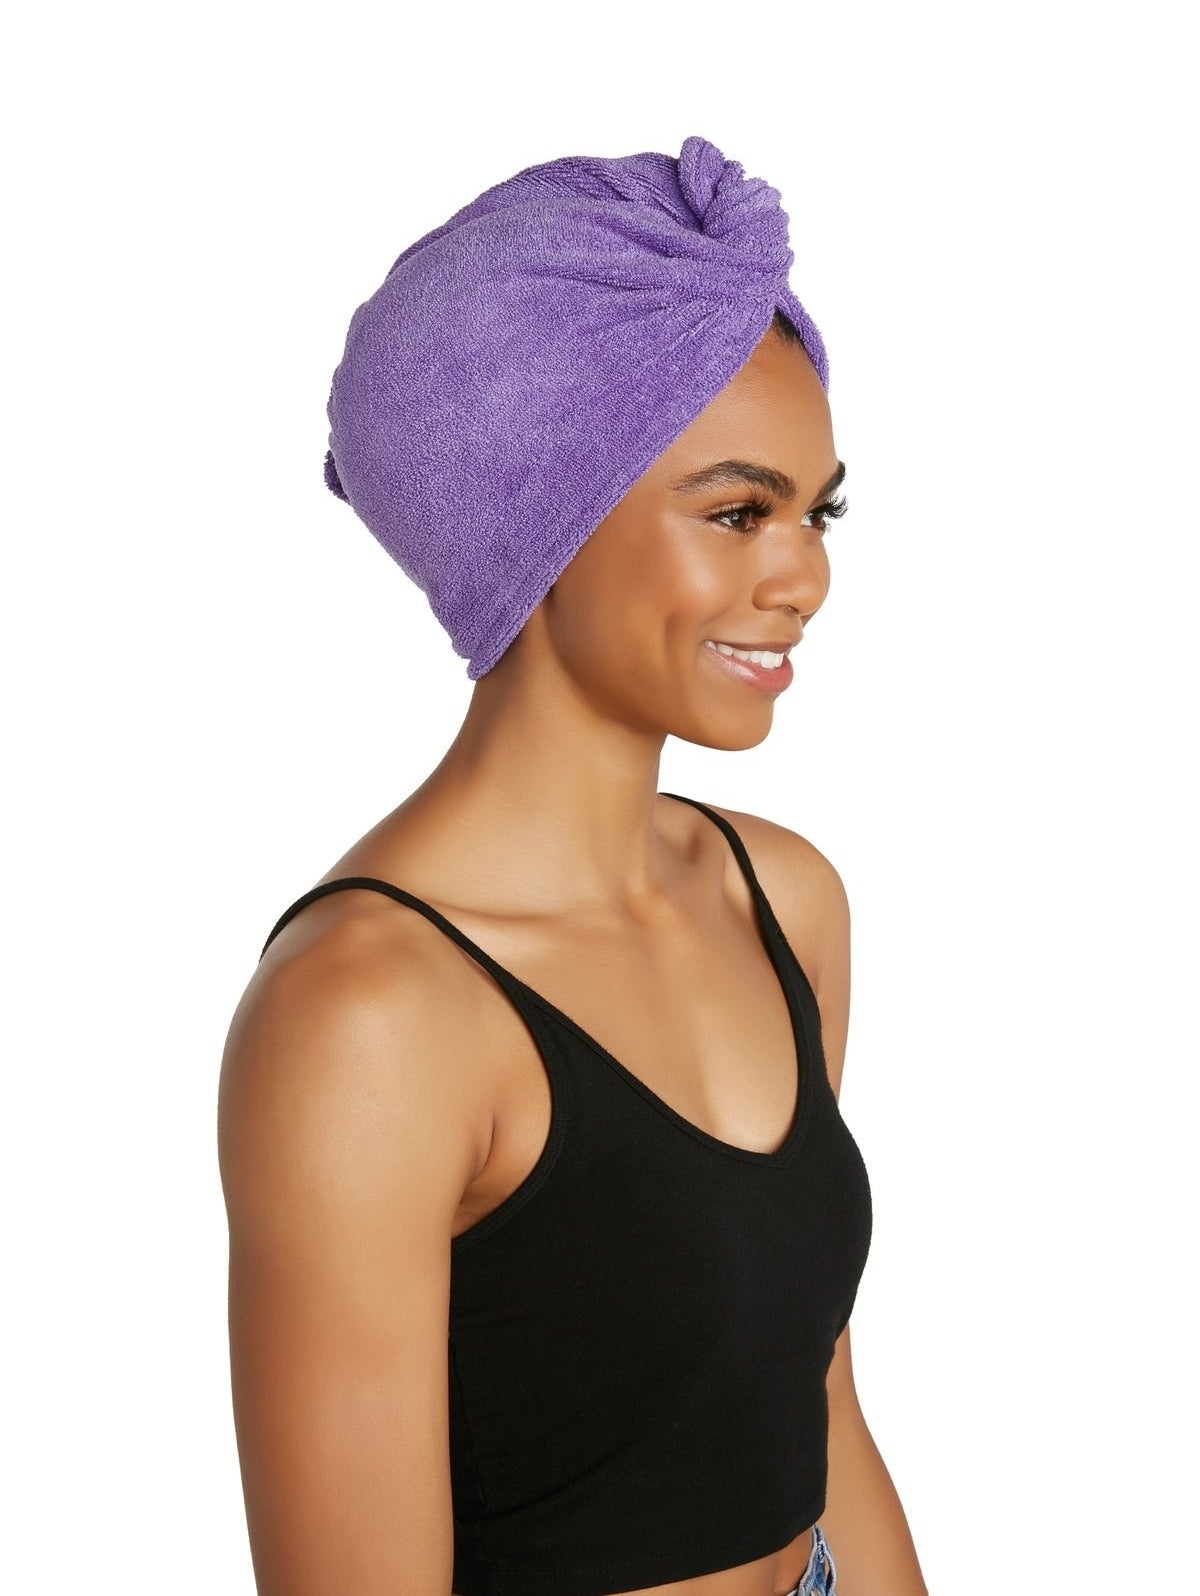 person wearing the turbie twist on head while wearing clothes